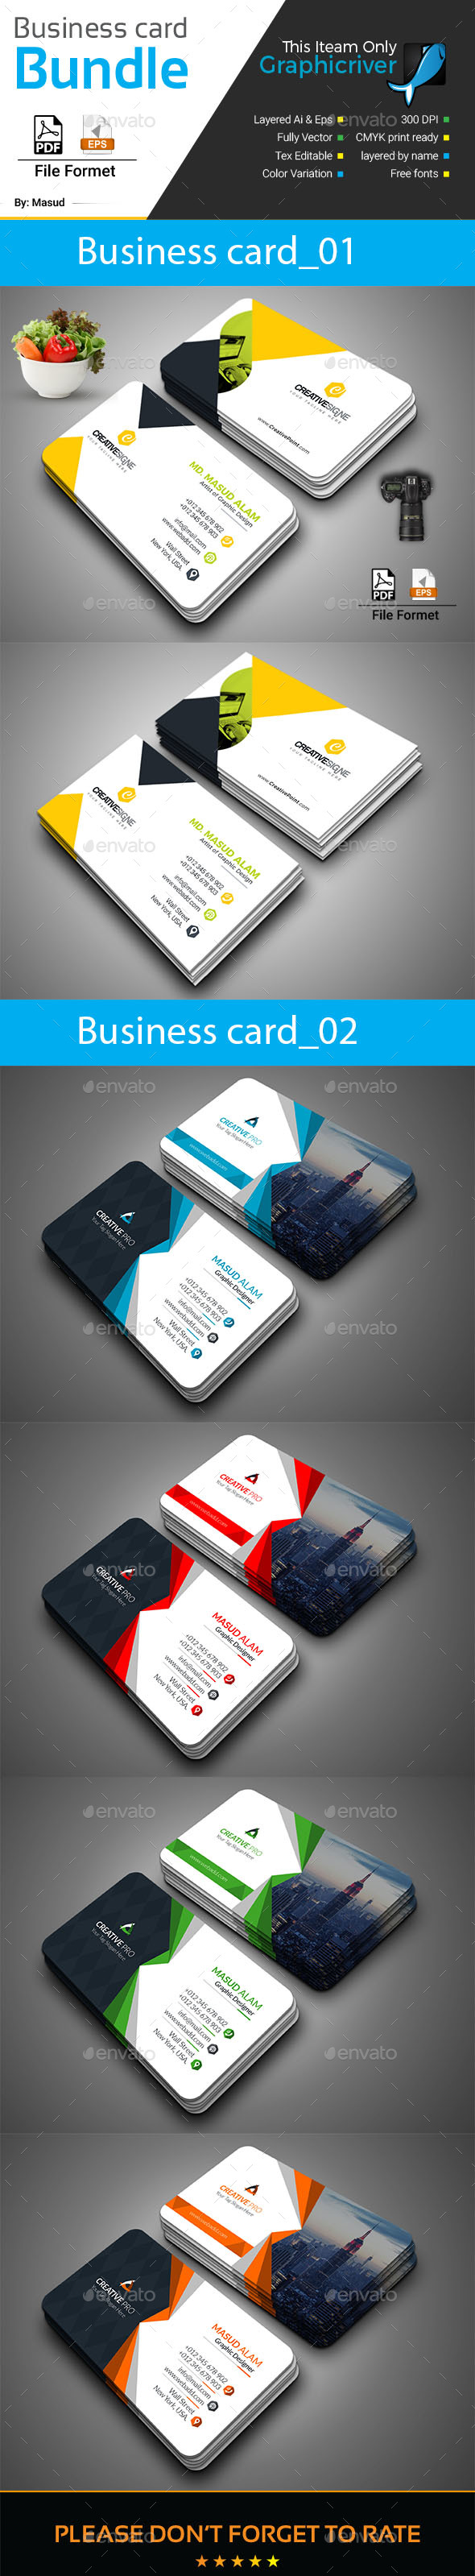 Business Card Bundle 2 in 1 in Business Card Templates